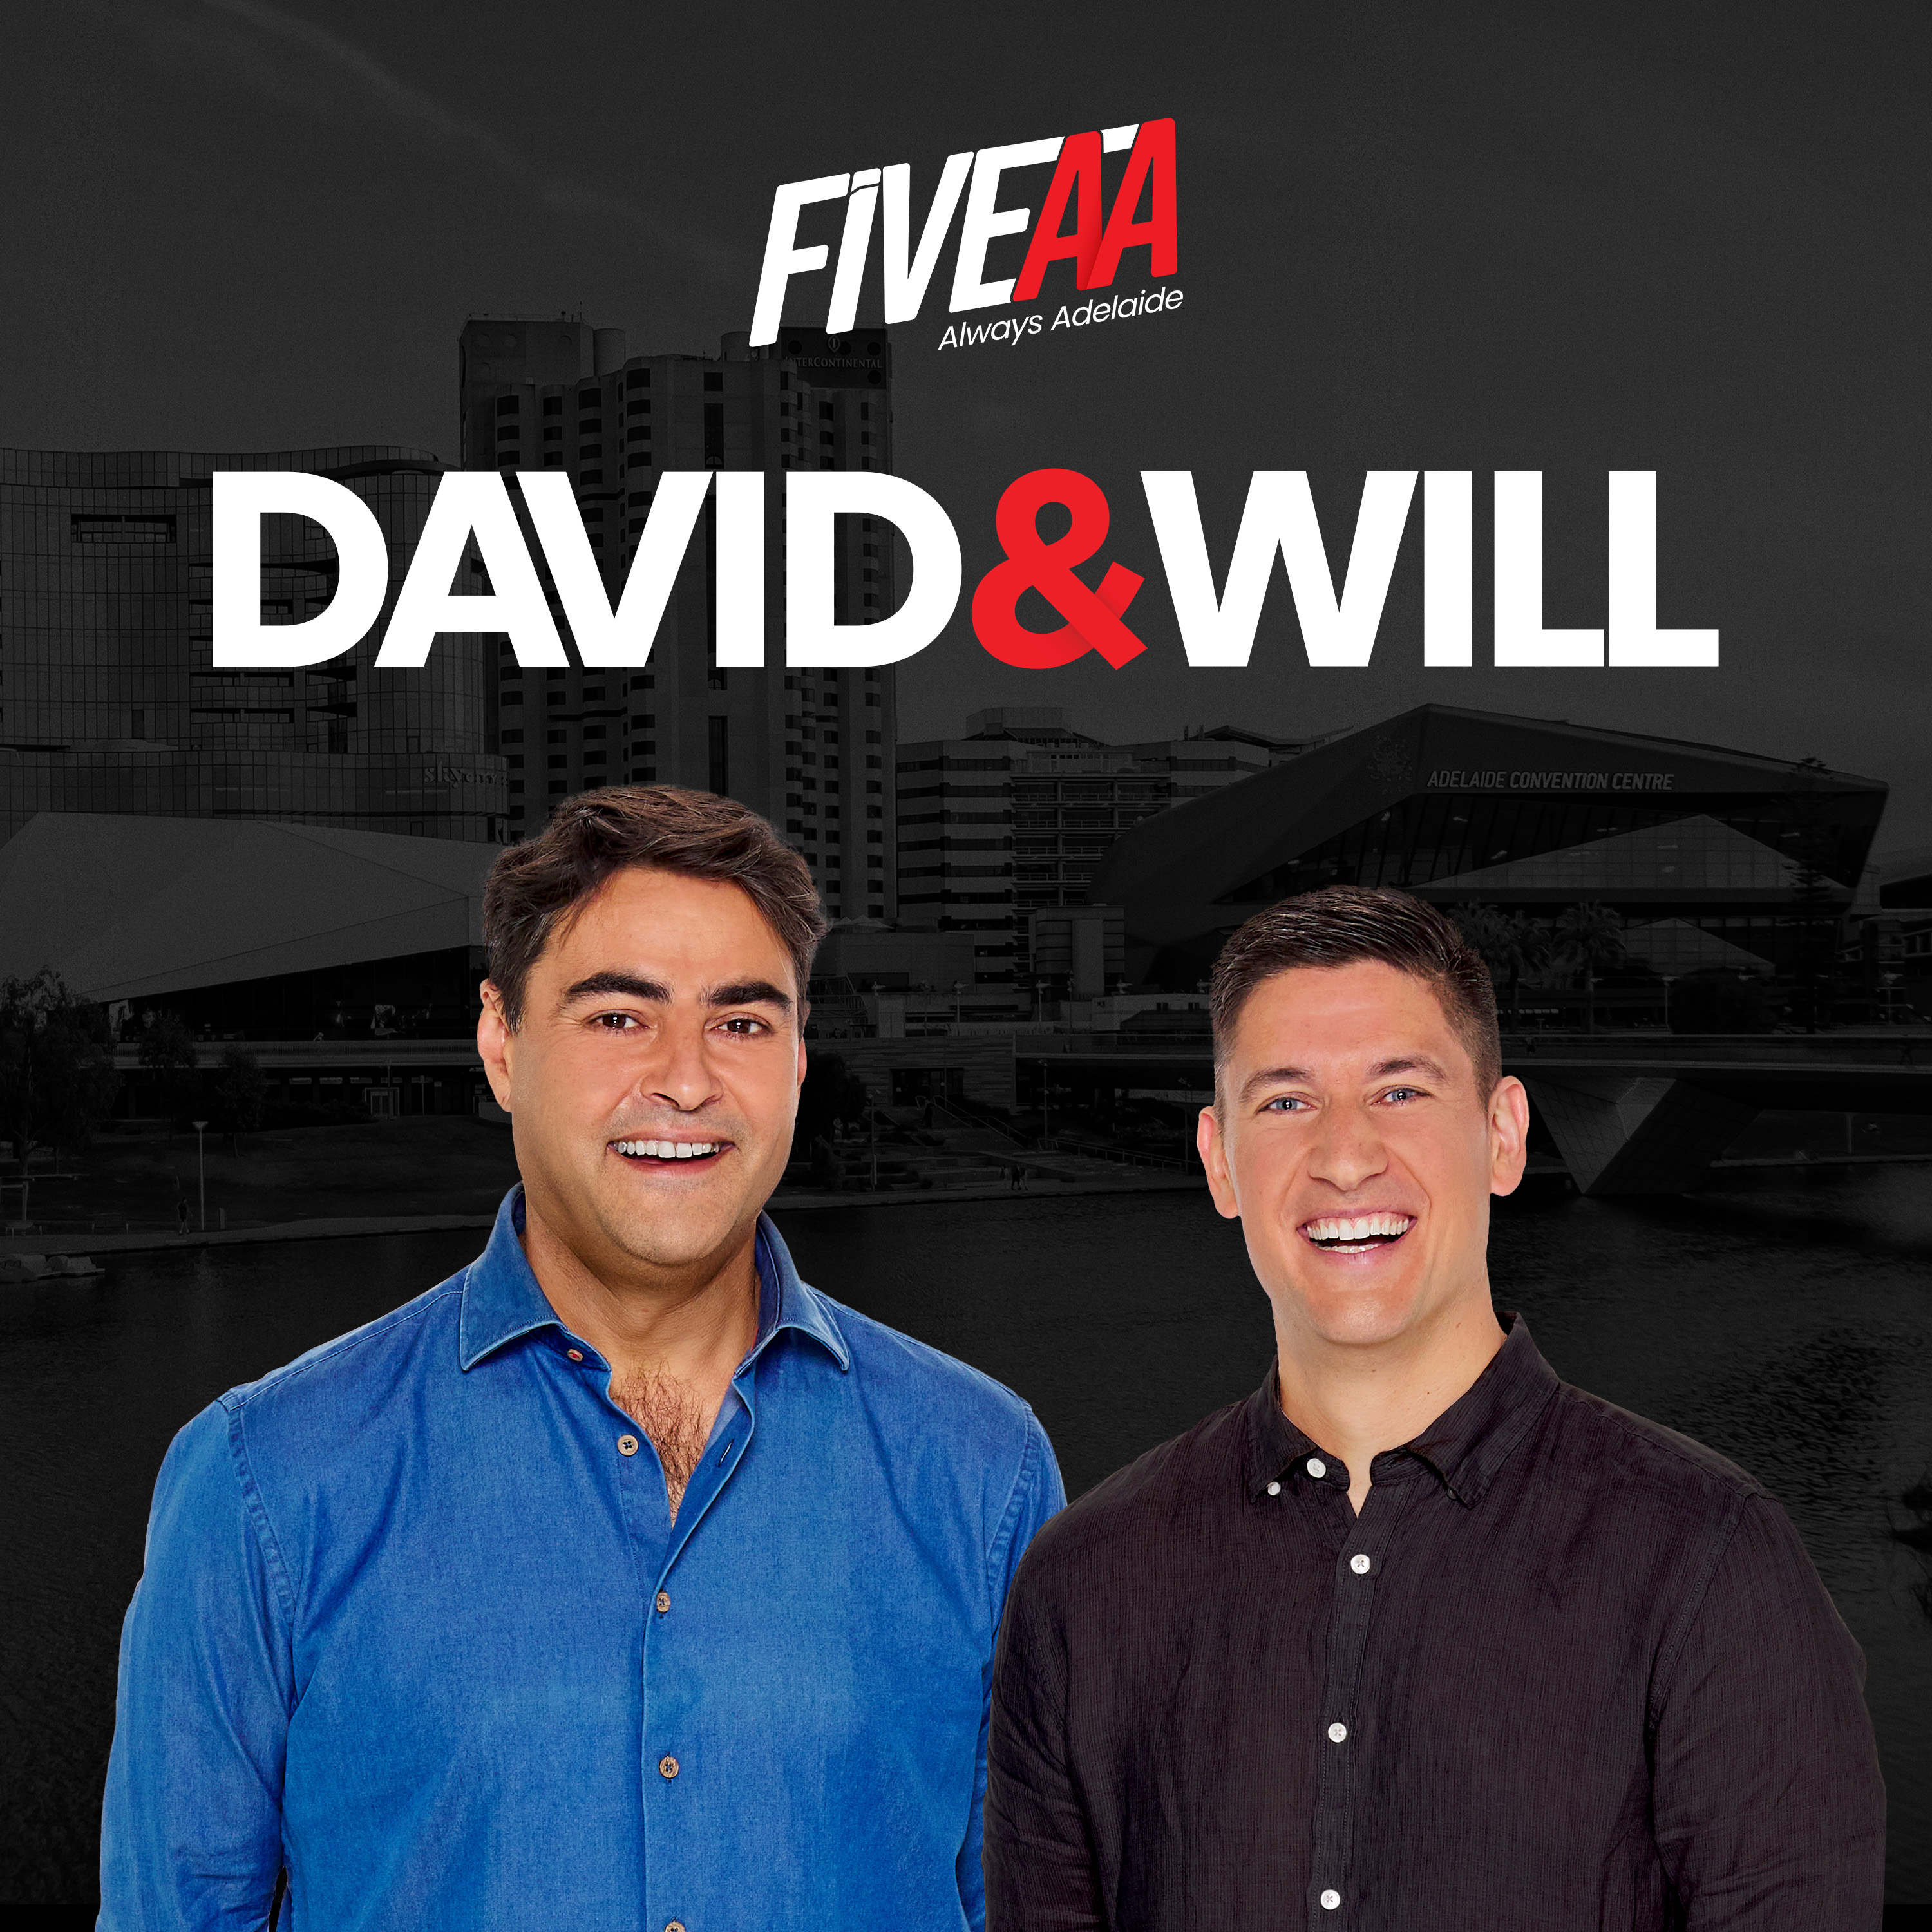 Done Deal - FIVEaa Remains The Home Of AFL In Adelaide